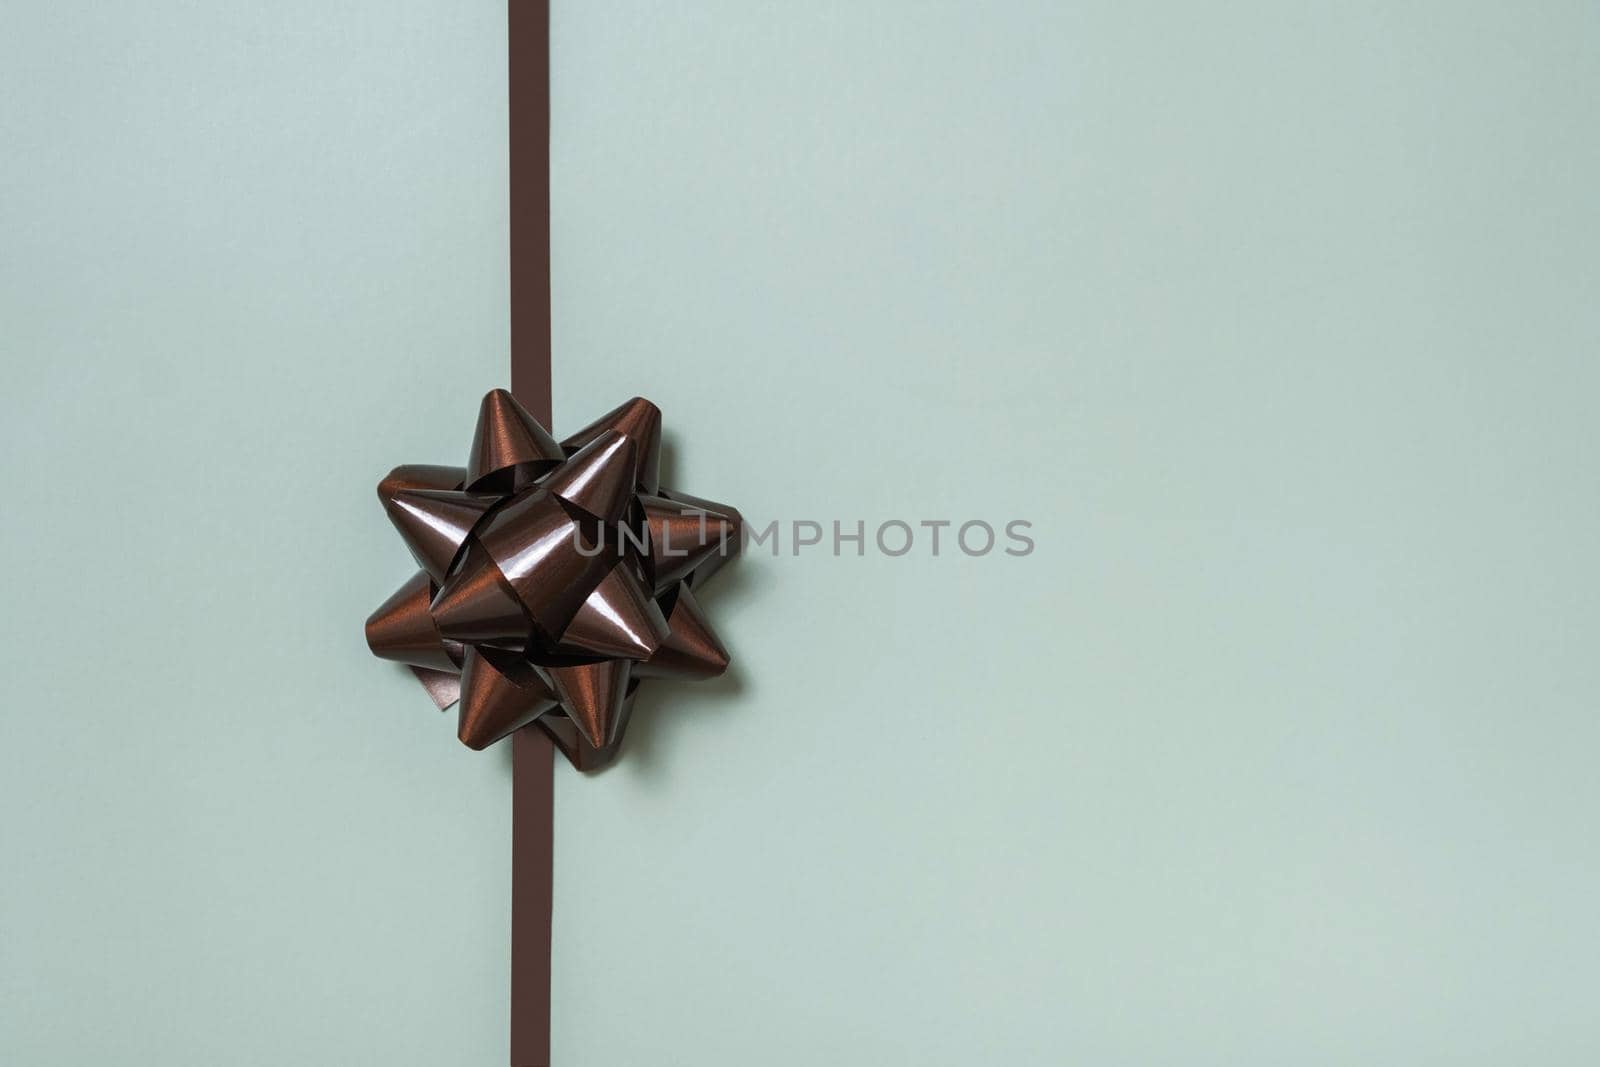 Festive brown gift bow for decorating a gift top view on a colored background.